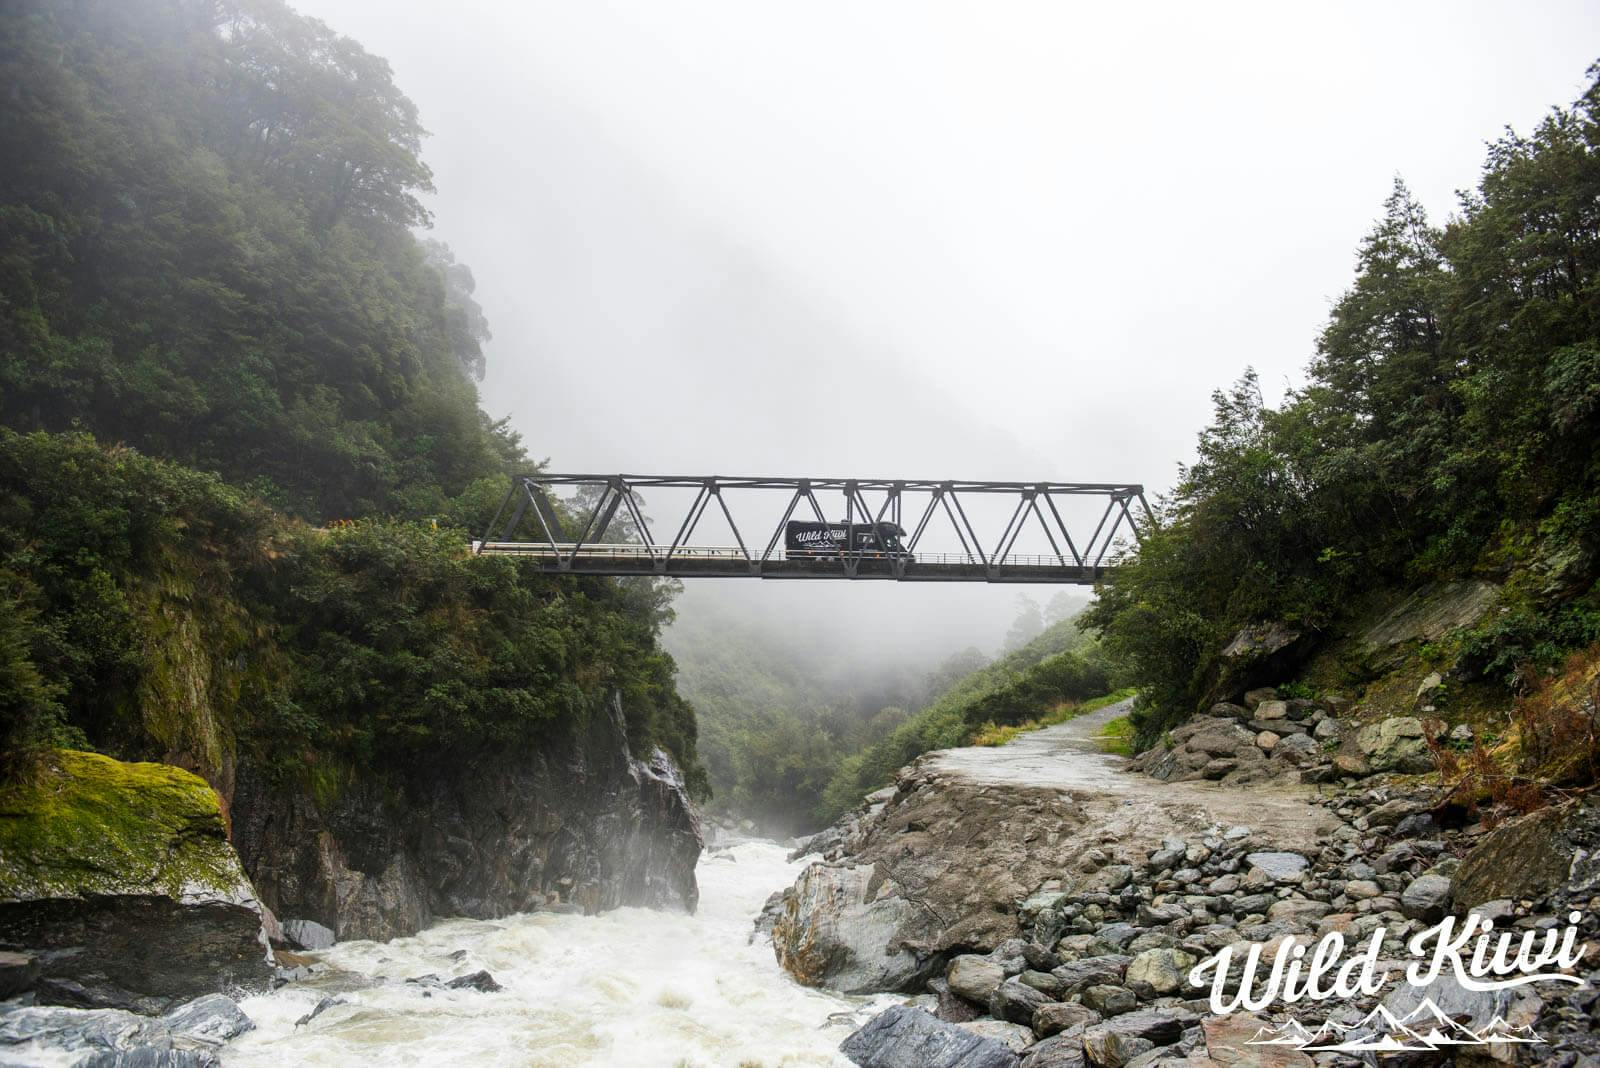 Explore New Zealand's wild side - Woods and rivers where movie magic has been made